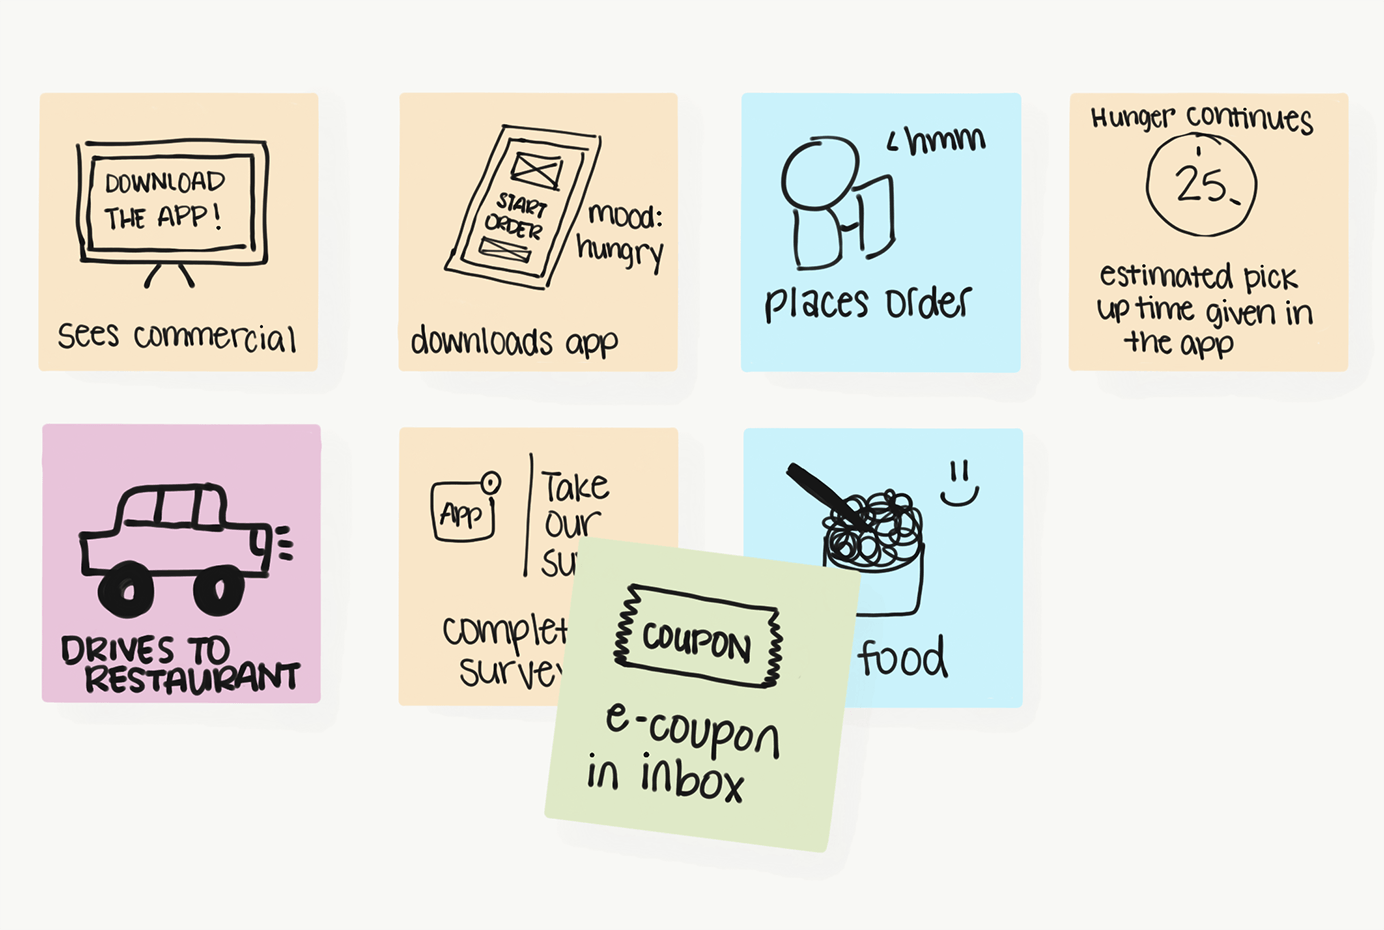 Storyboards Help Visualize UX Ideas